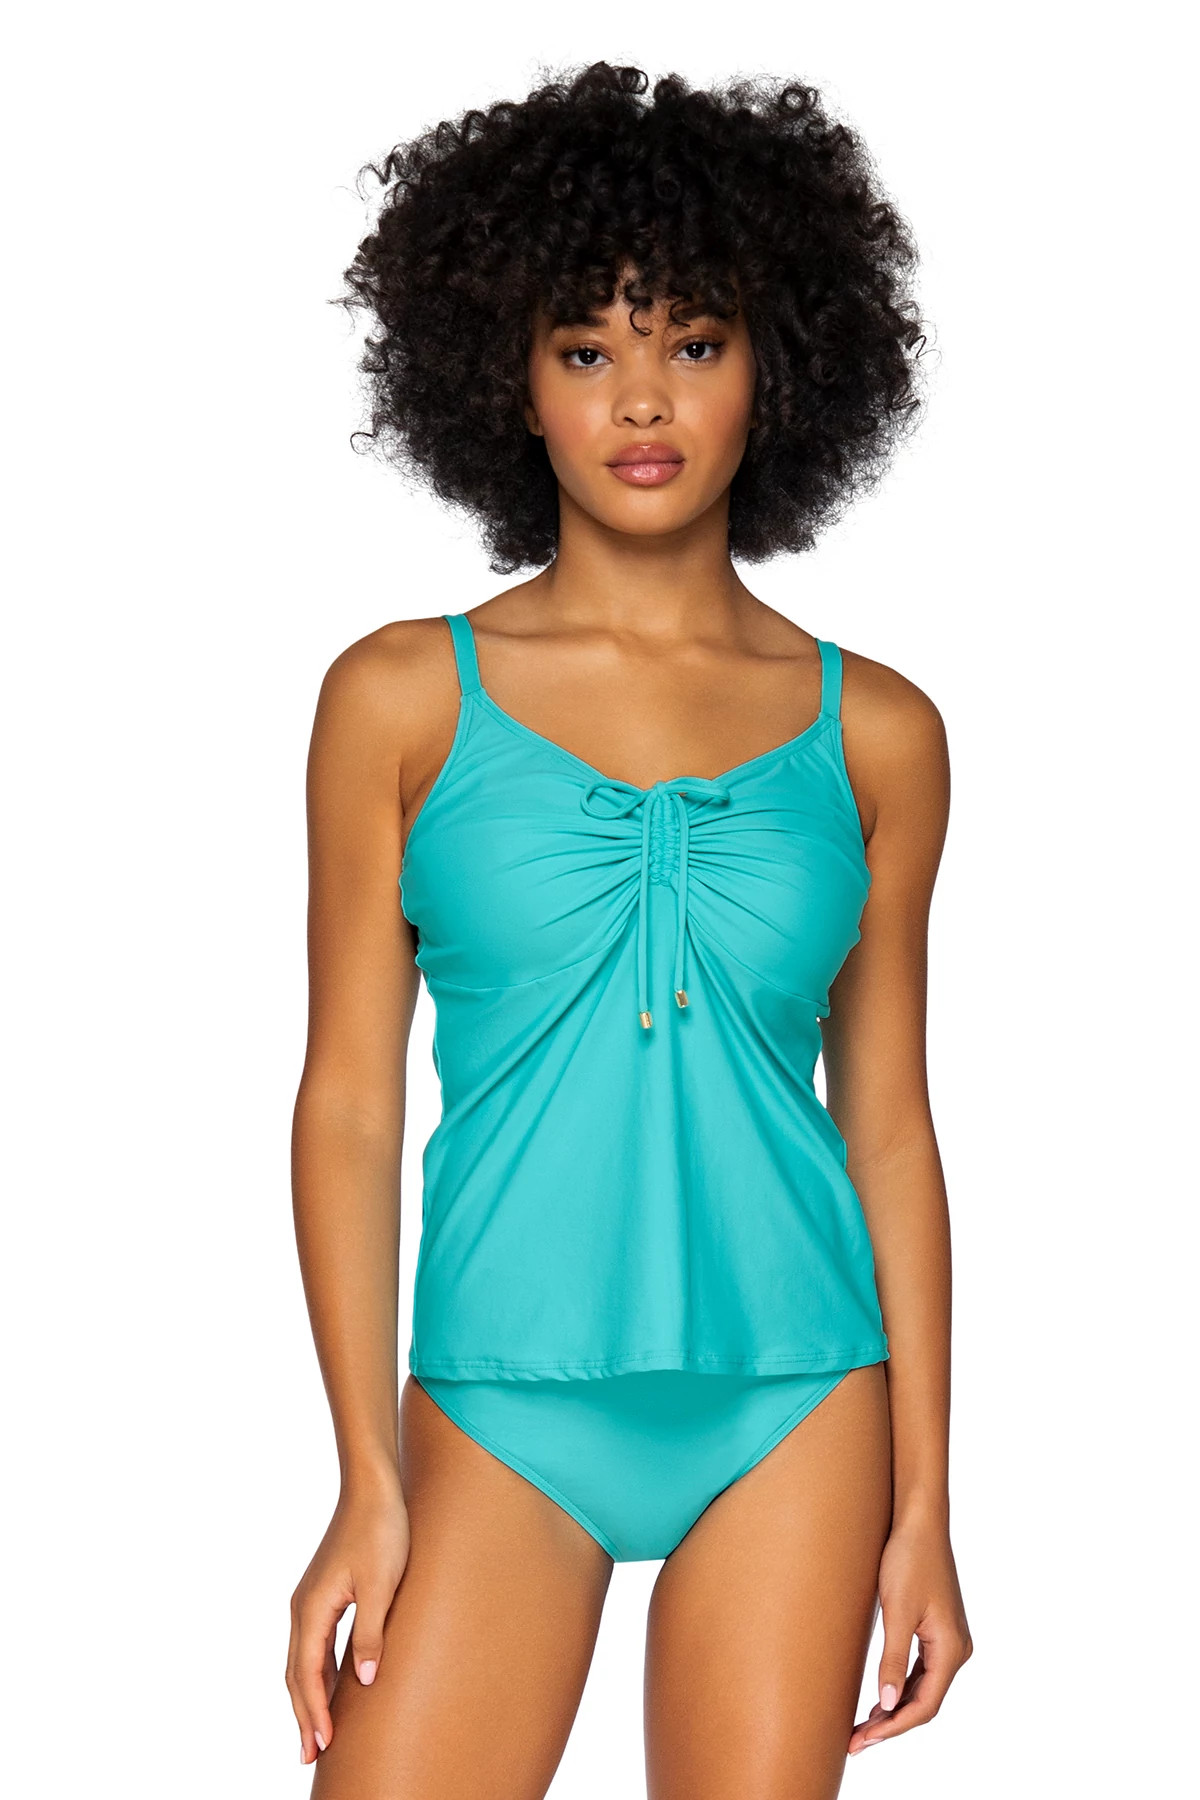 SEASIDE AQUA Avery Over The Shoulder Tankini Top (E-H Cup) image number 1